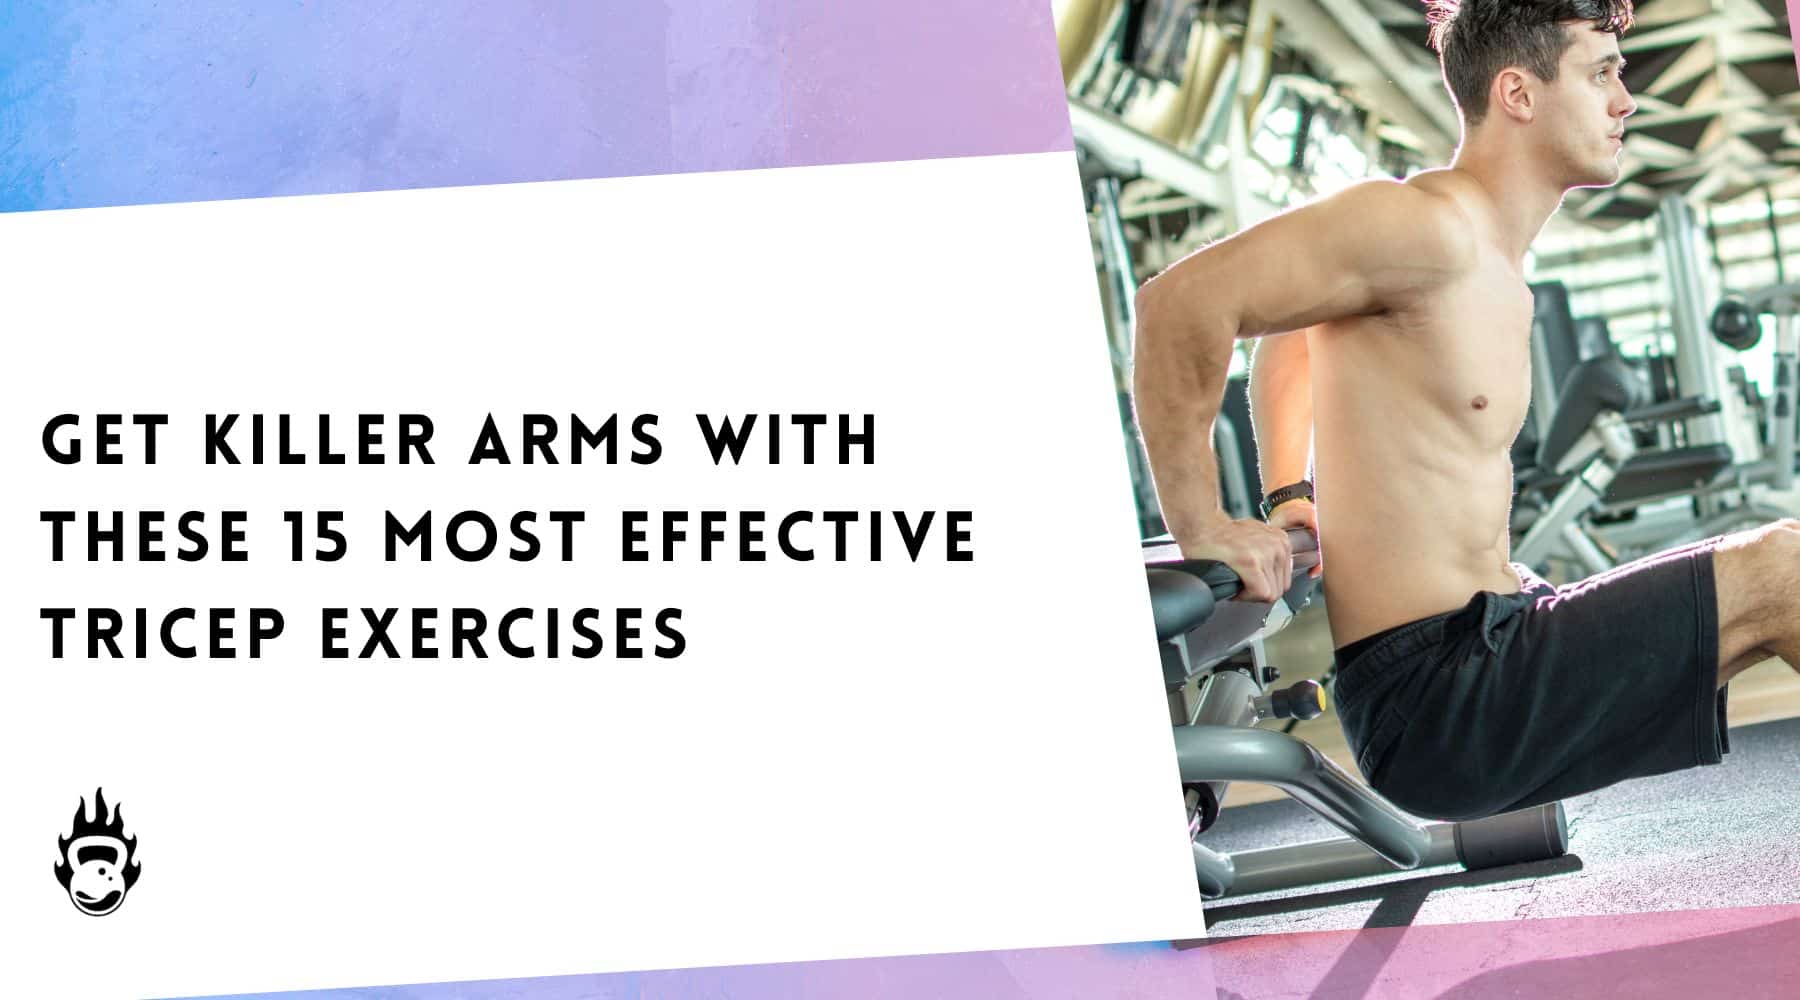 5 Of The Best Triceps Exercises For Strong & Toned Arms (2022)